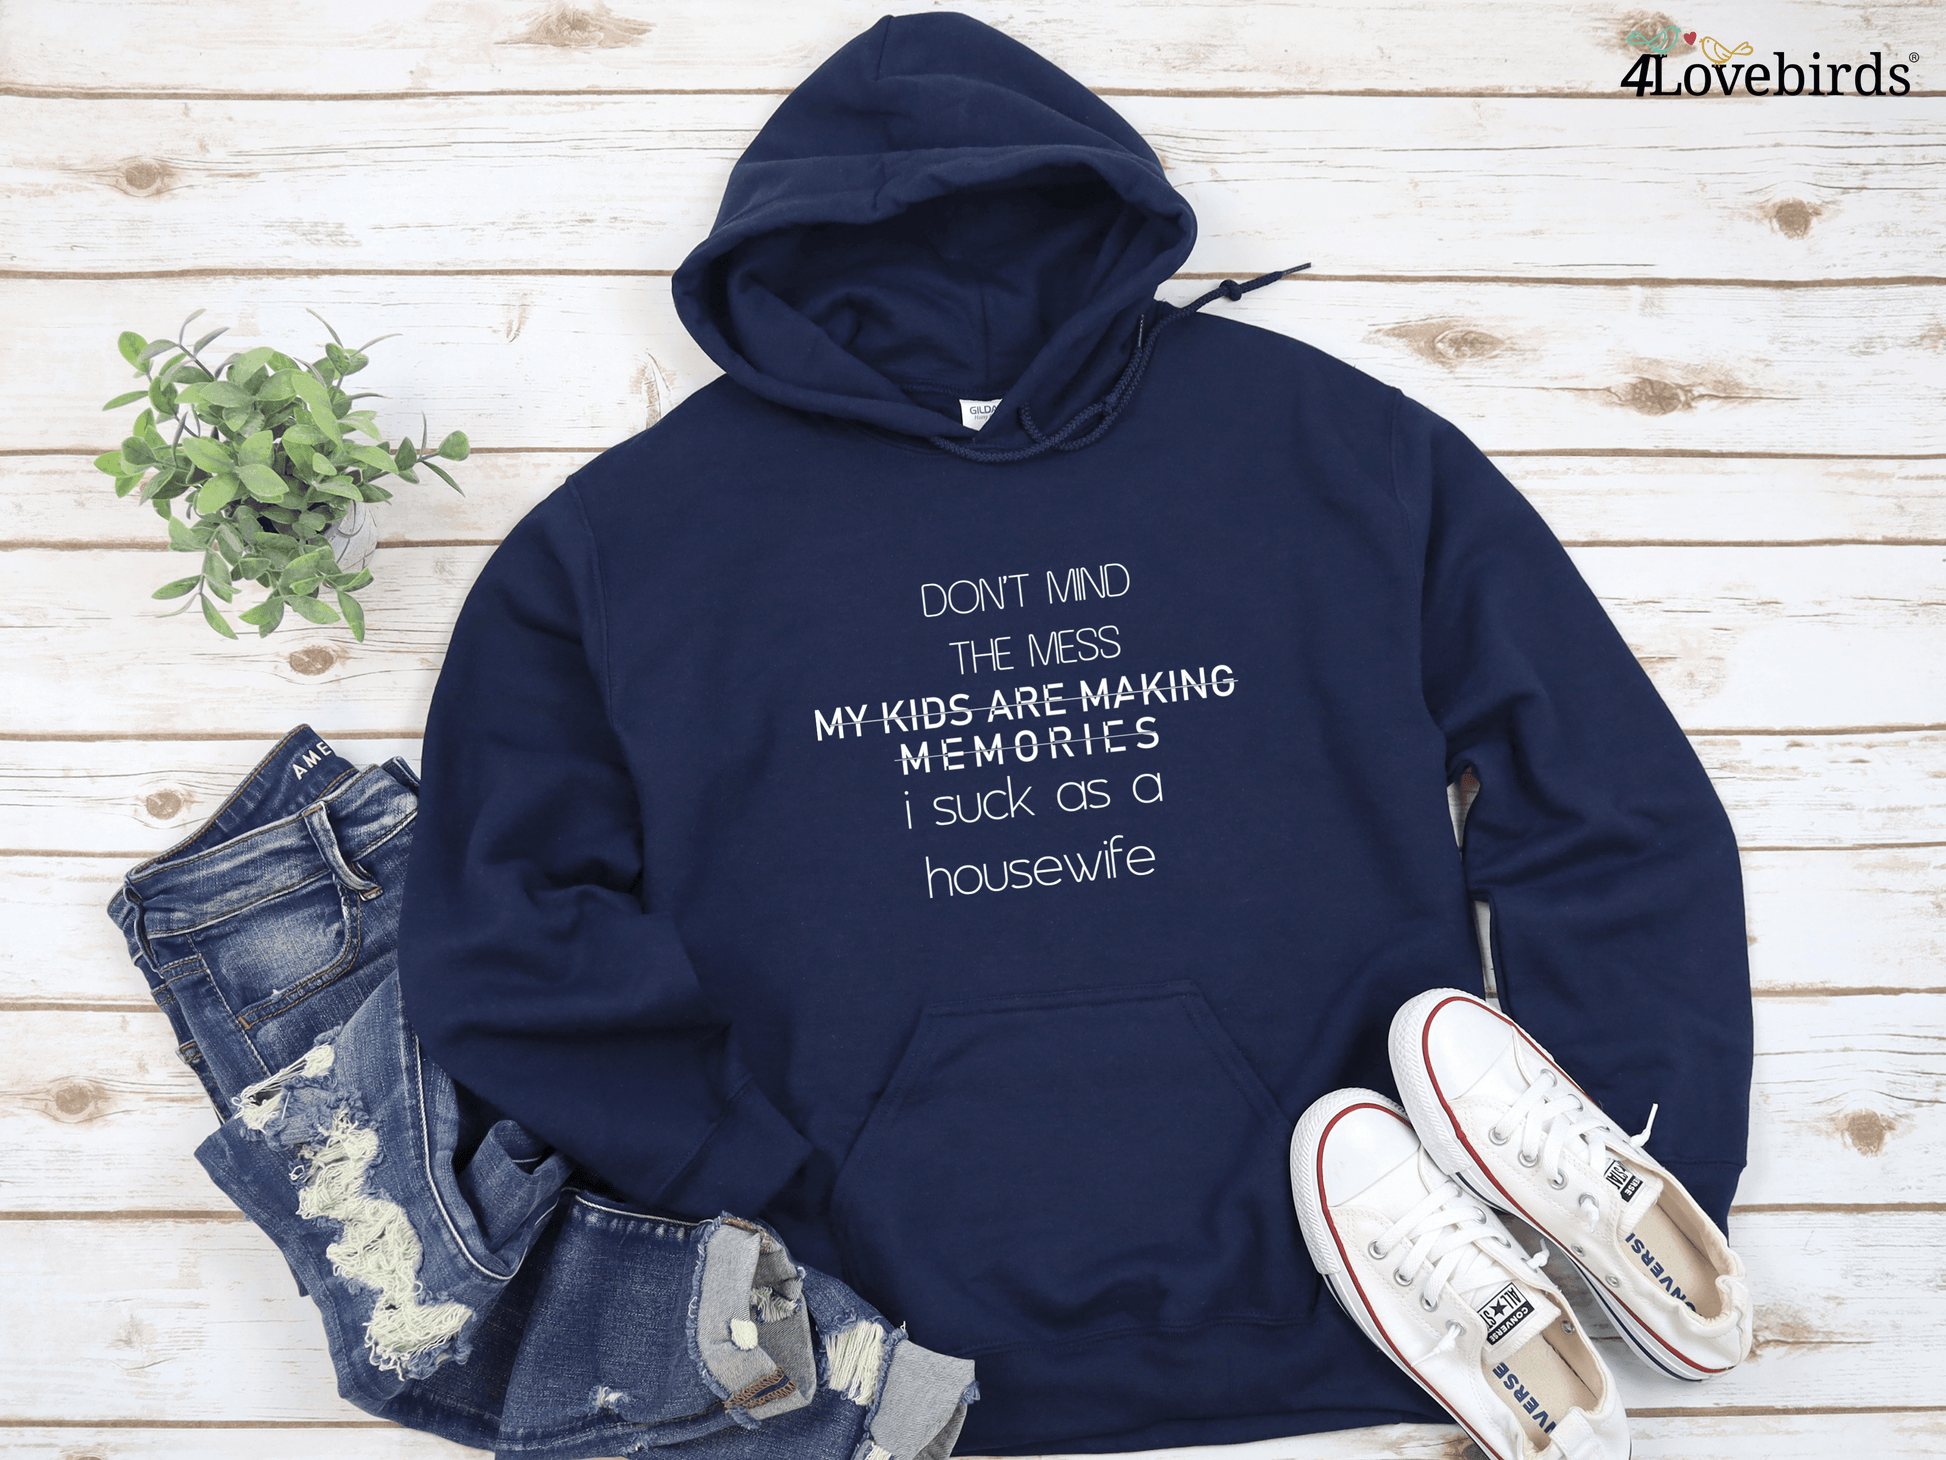 Don't Mind The Mess, I suck As A Housewife T-Shirt, Funny Hoodies, Humorous Sweatshirts, Wife Gifts - 4Lovebirds